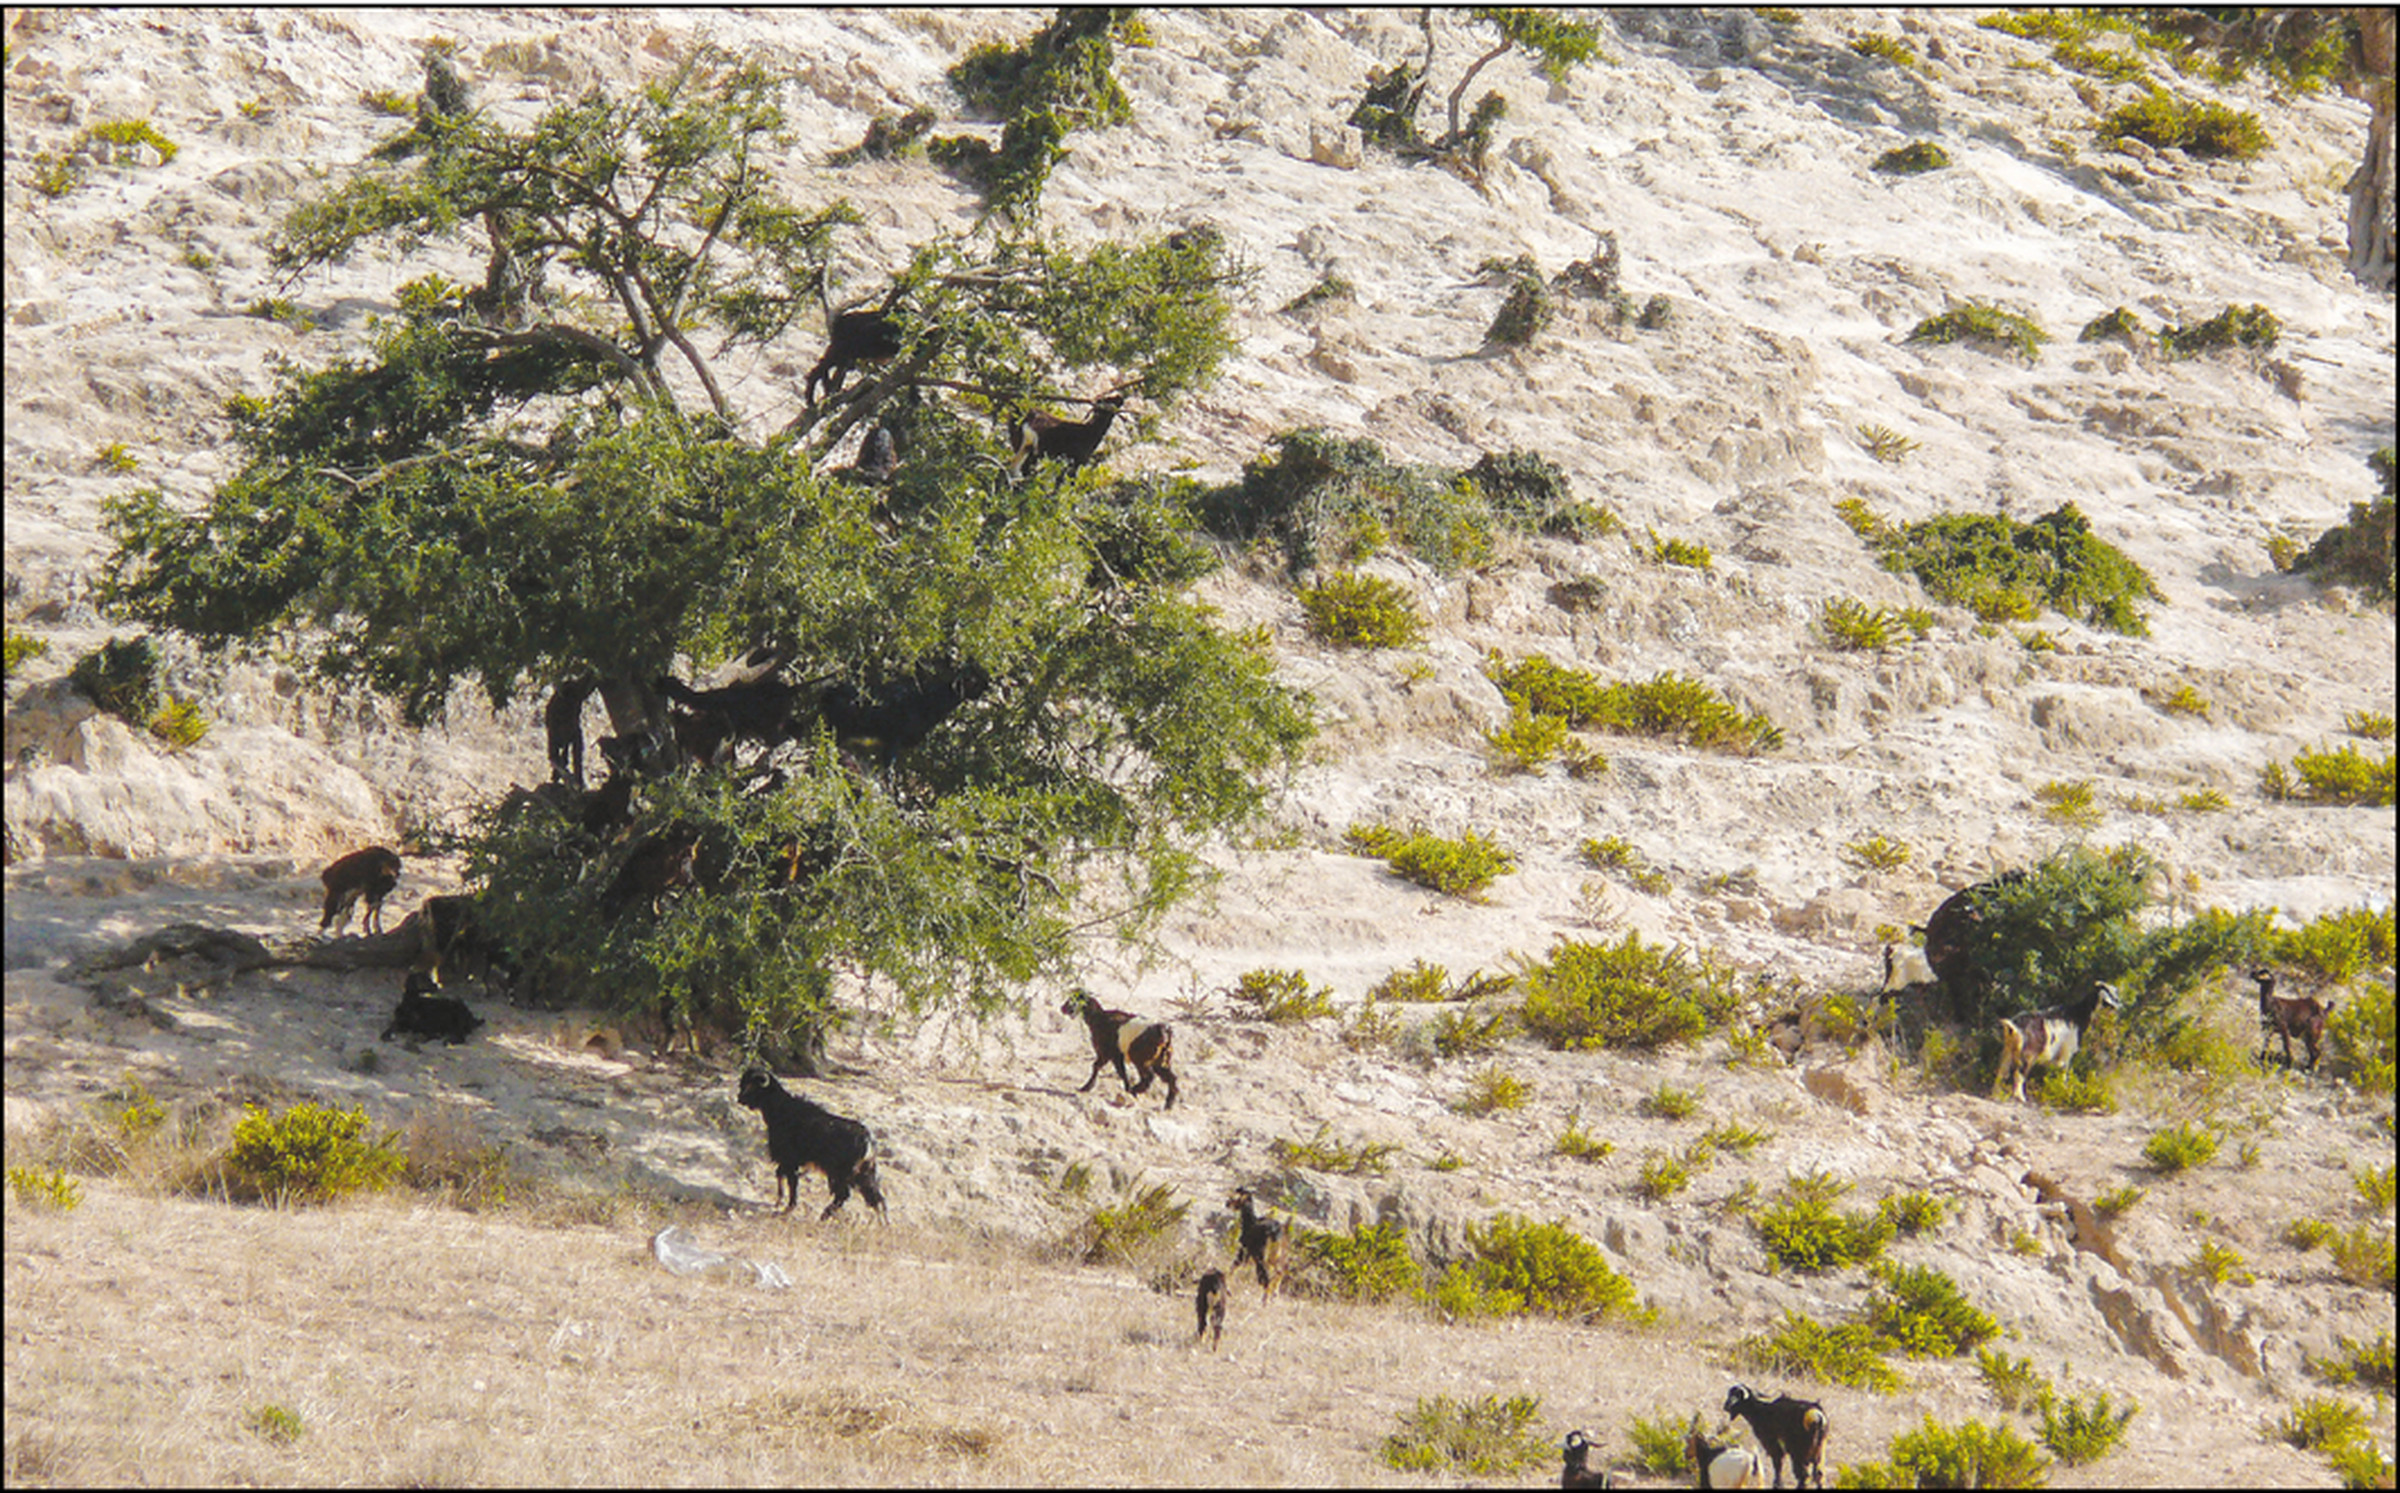 In some arid habitats, such as argan forests, most green vegetation is on the tops of trees and goats climb there to feed.